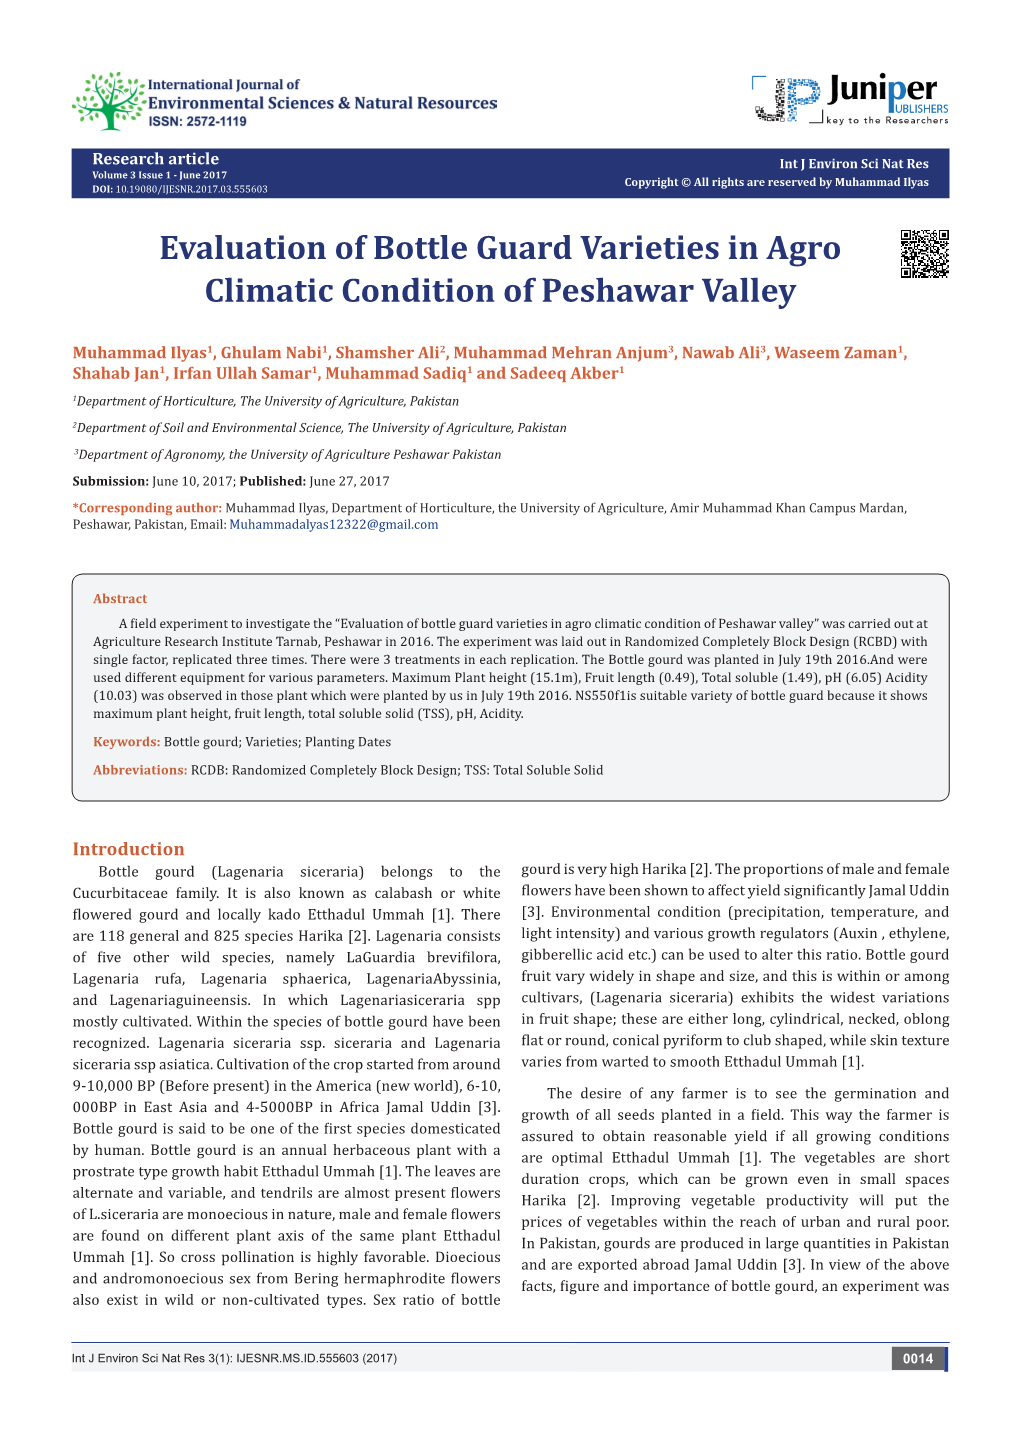 Evaluation of Bottle Guard Varieties in Agro Climatic Condition of Peshawar Valley